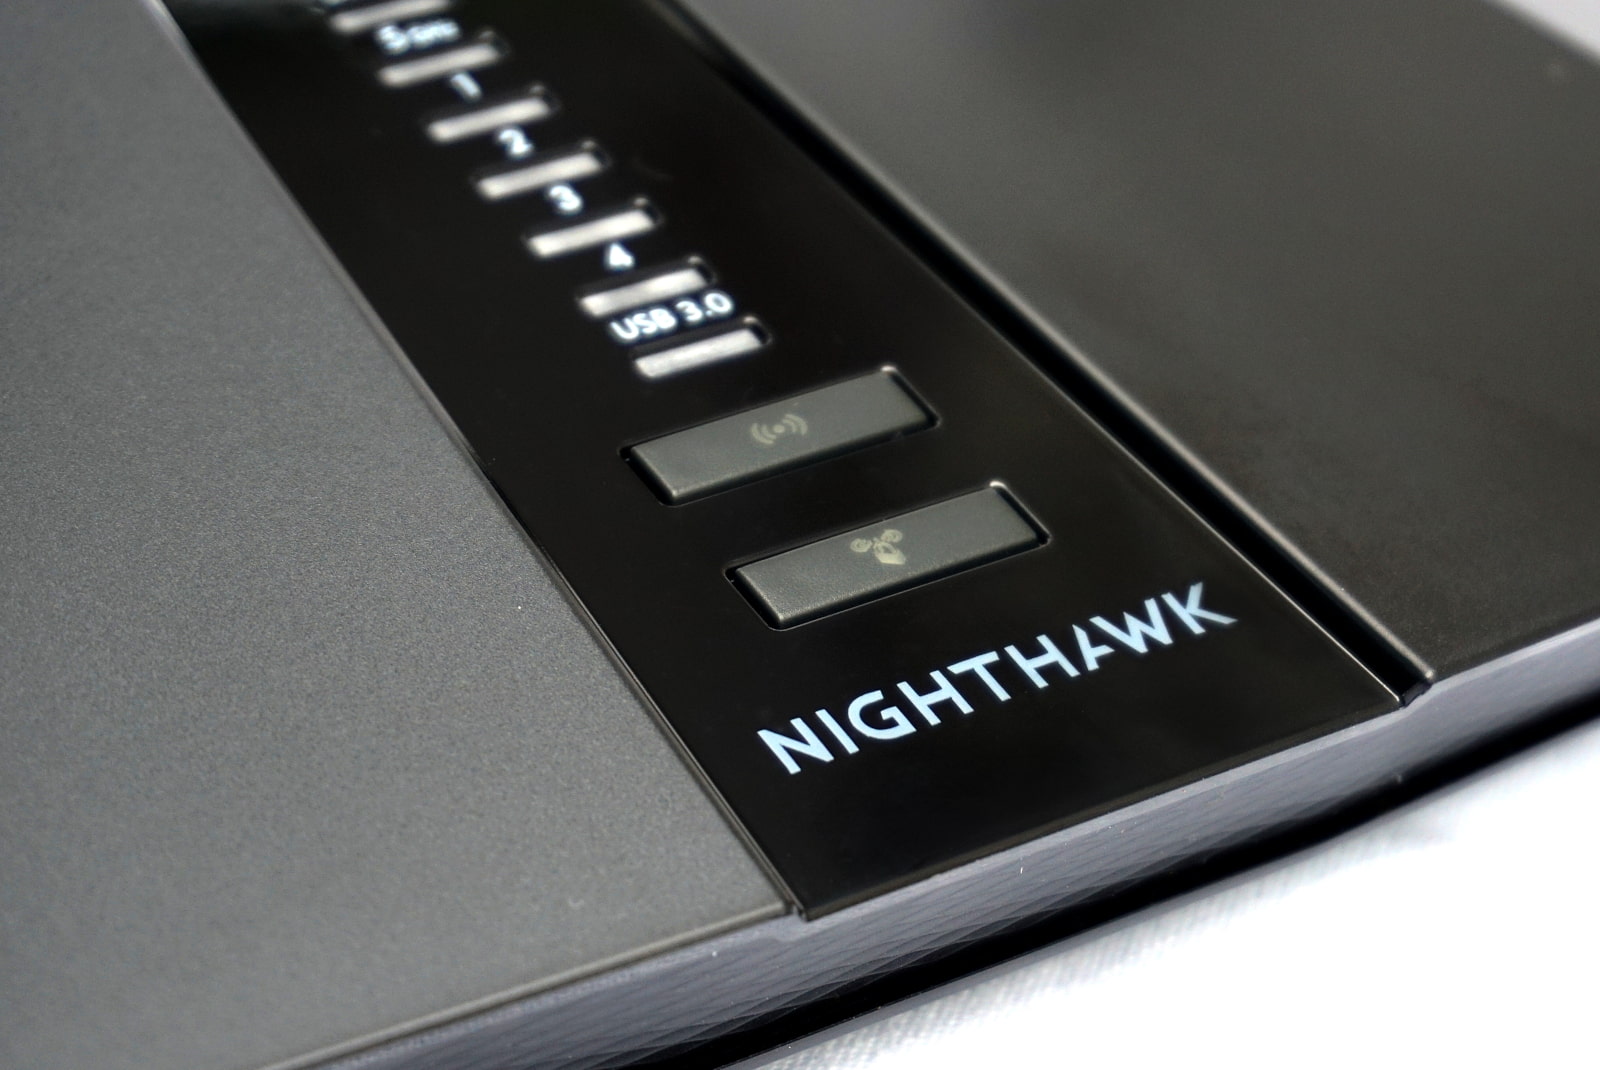 Close up of front of router showing Nighthawk logo and buttons